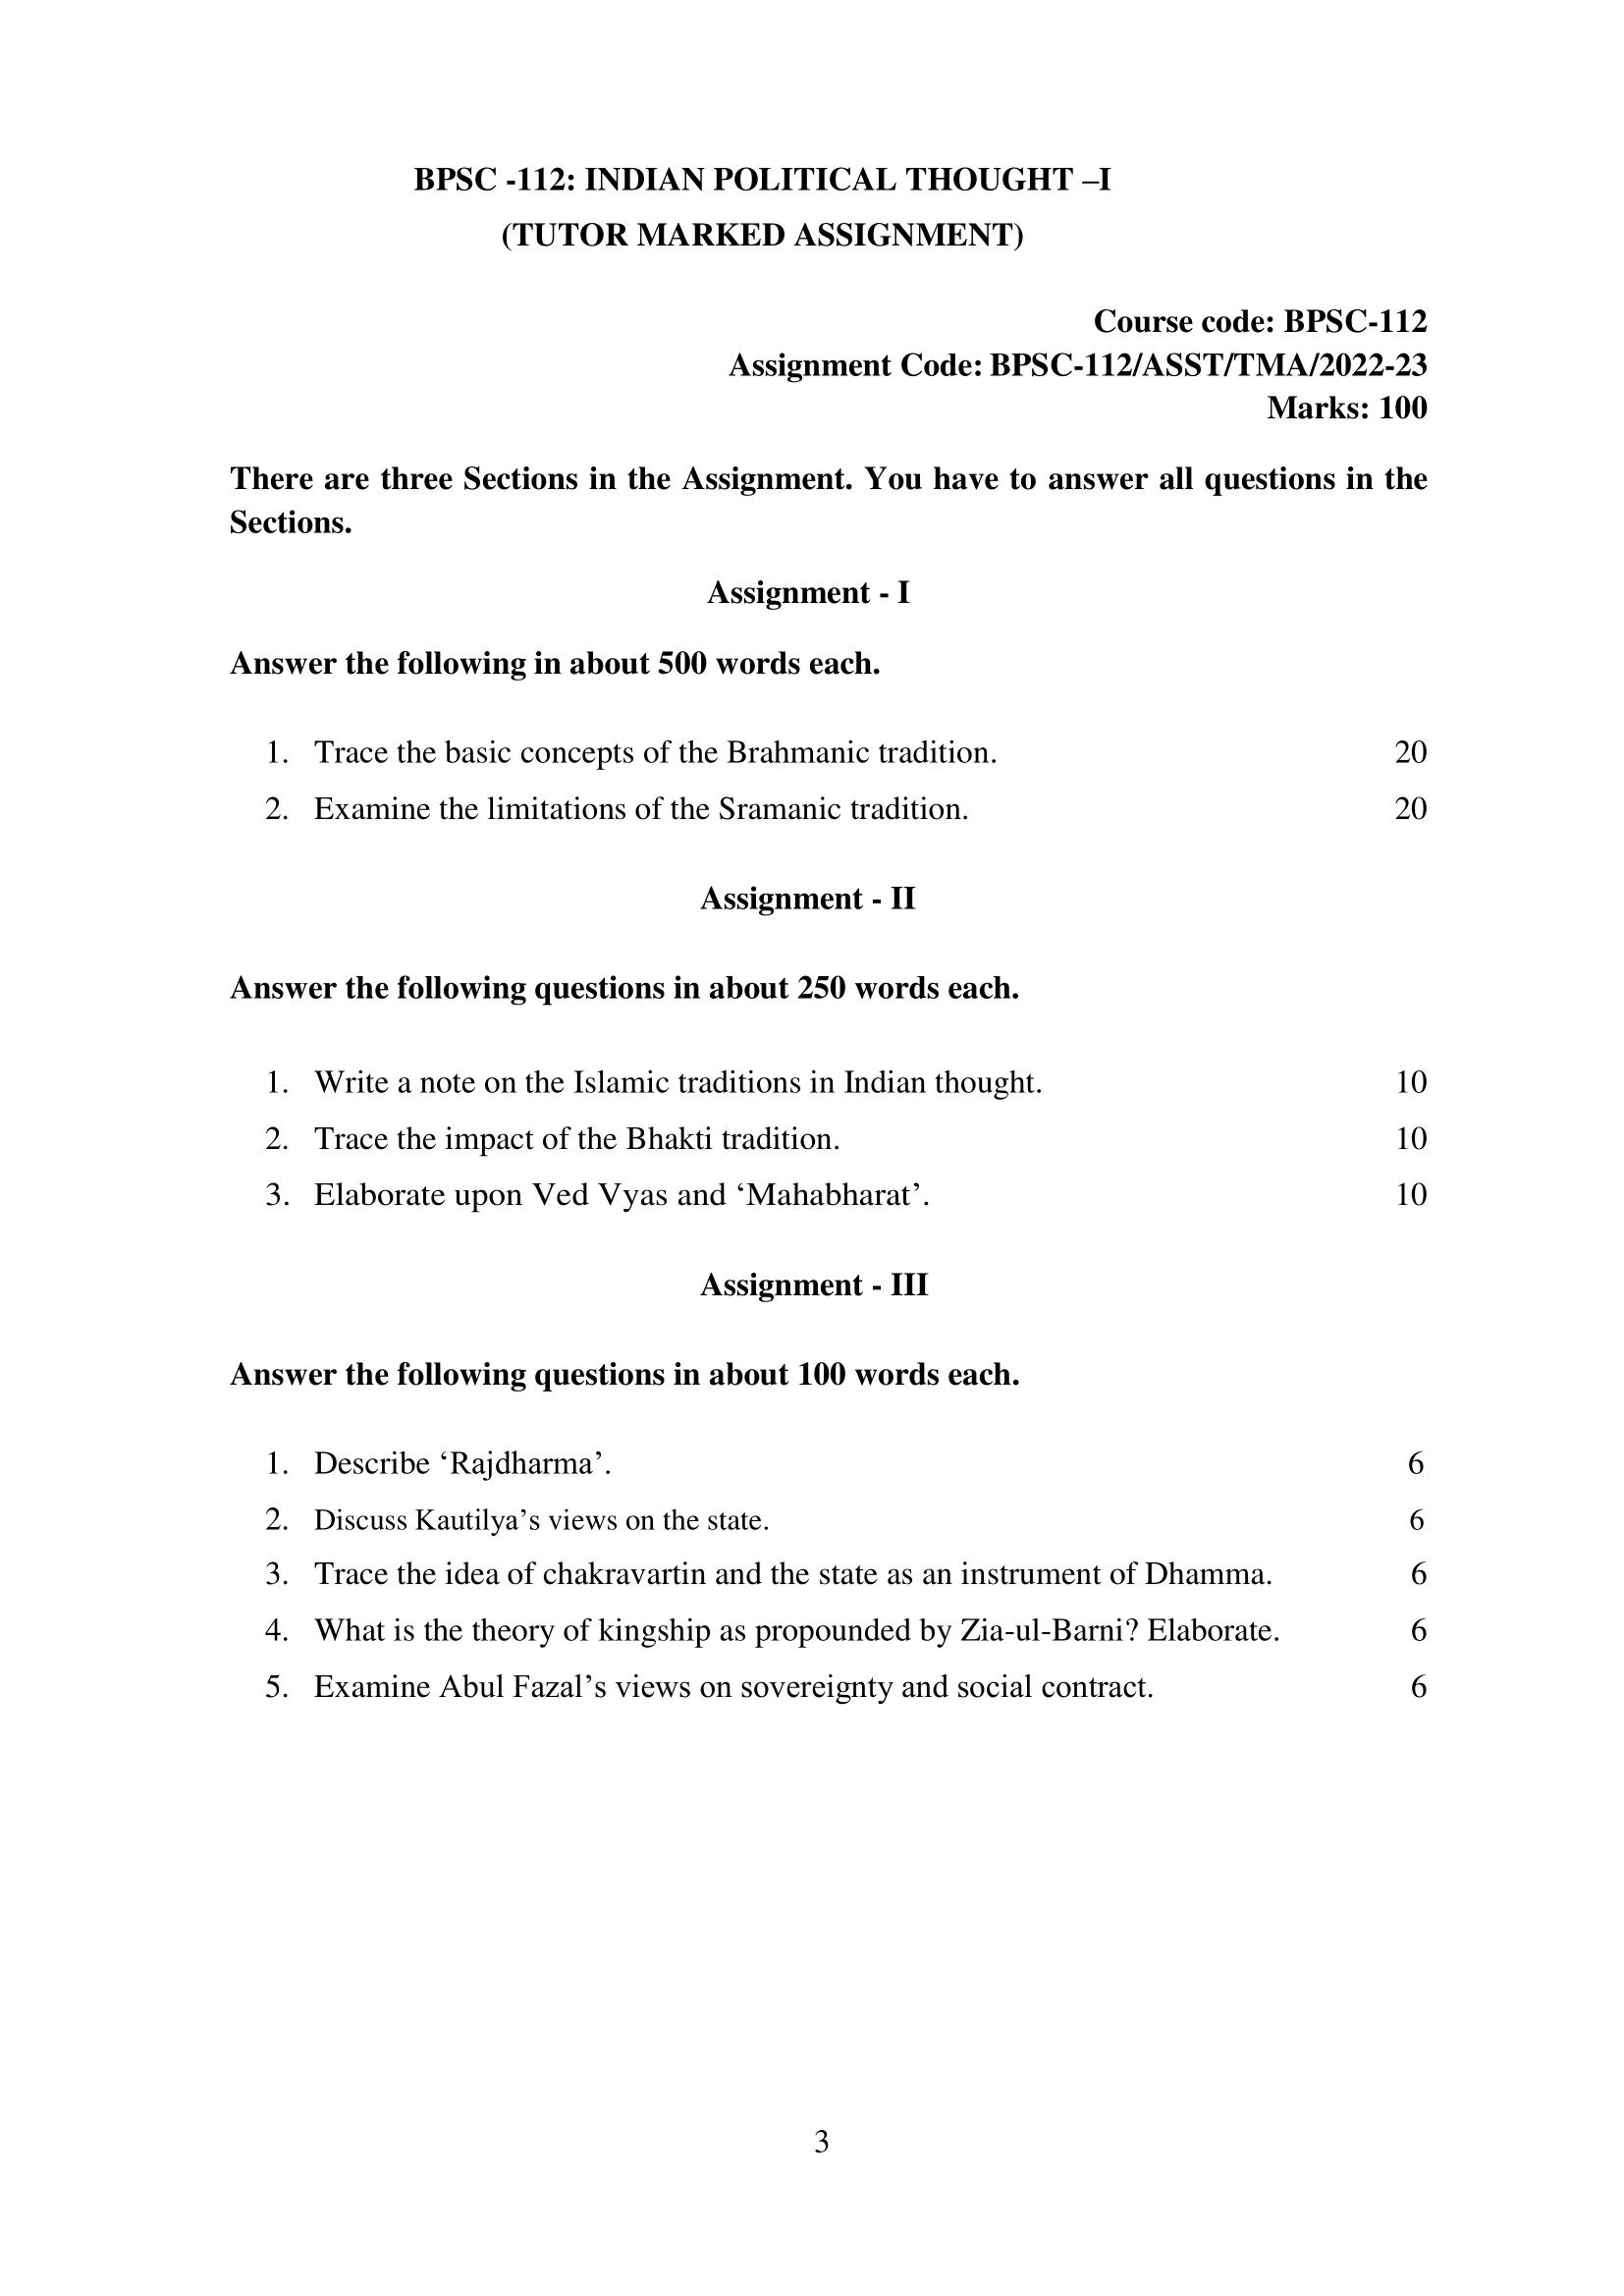 BPSC-112 IGNOU BAG Solved Assignment-INDIAN POLITICAL THOUGHT–I 